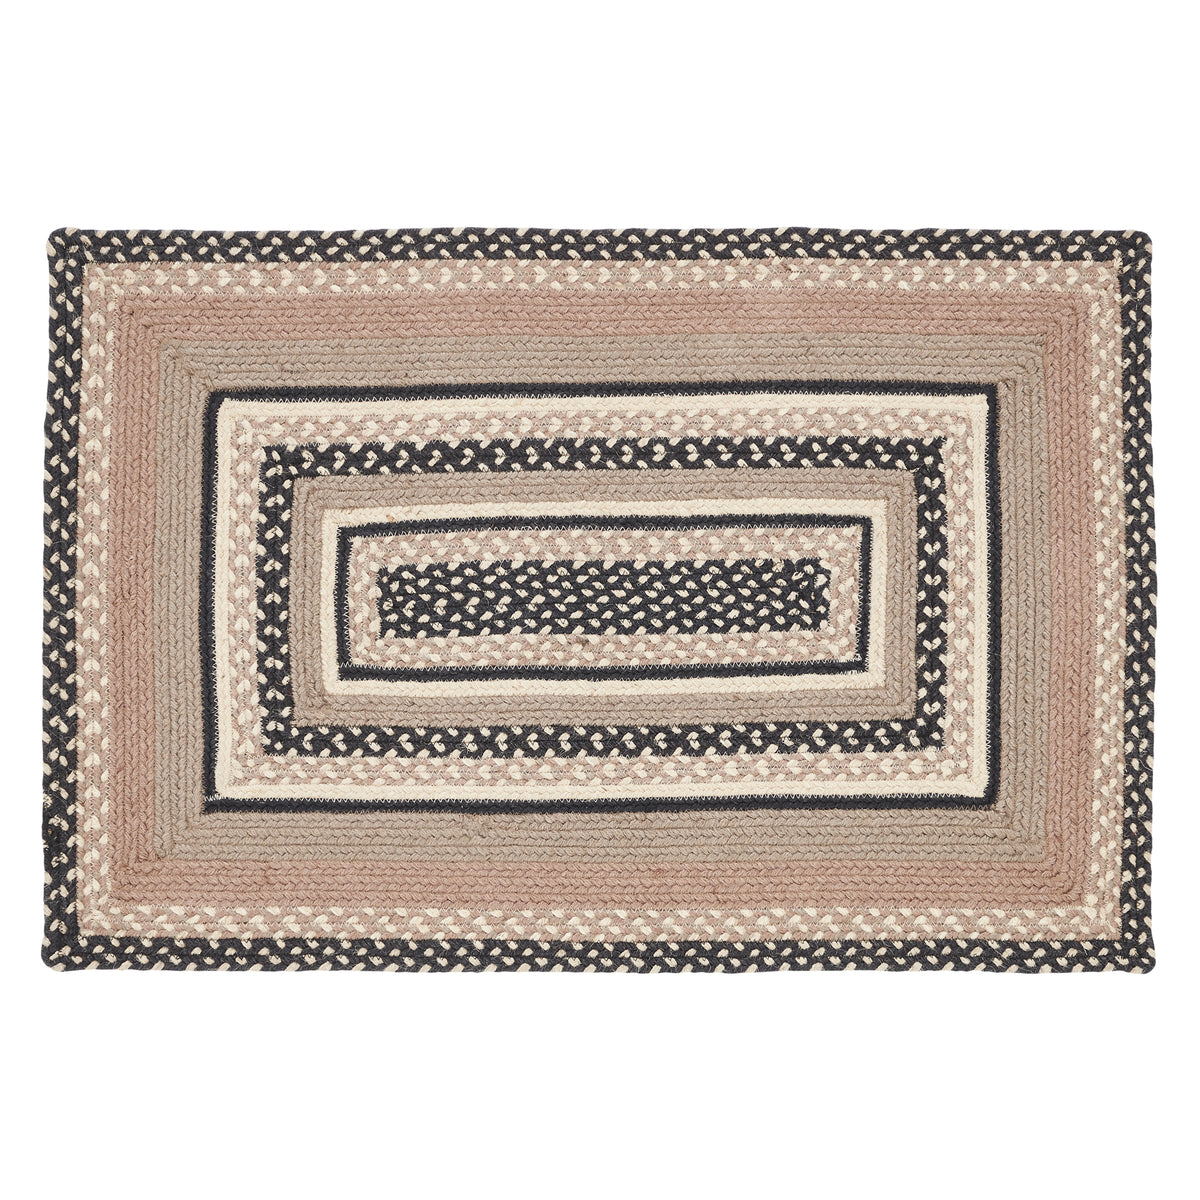 April & Olive Sawyer Mill Charcoal Creme Jute Rug Rect w/ Pad 24x36 By VHC Brands